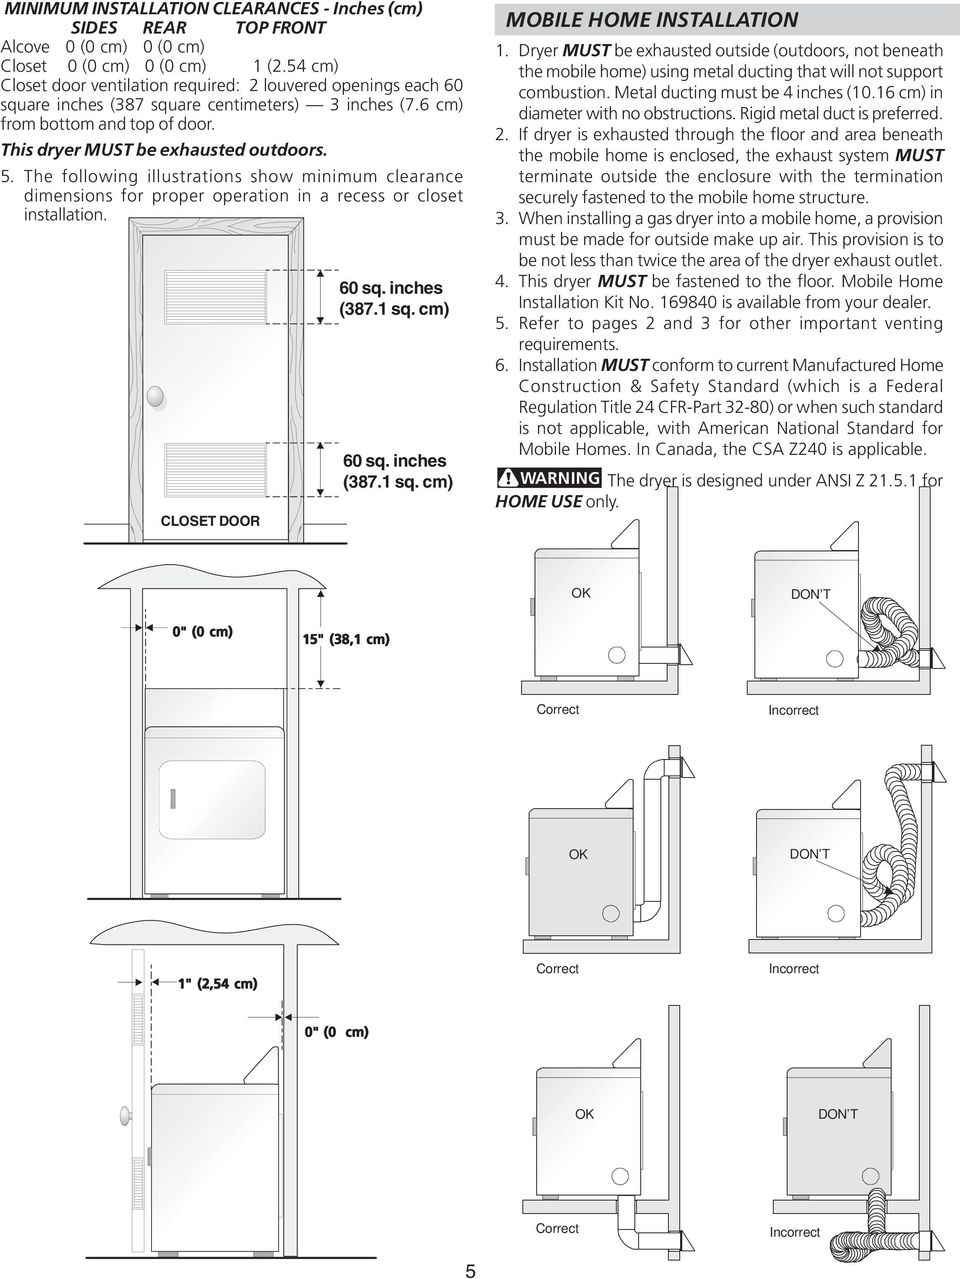 The following illustrations show minimum clearance dimensions for proper operation in a recess or closet installation. CLOSET DOOR 60 sq. inches (387.1 sq. cm) 60 sq. inches (387.1 sq. cm) MOBILE HOME INSTALLATION 1.